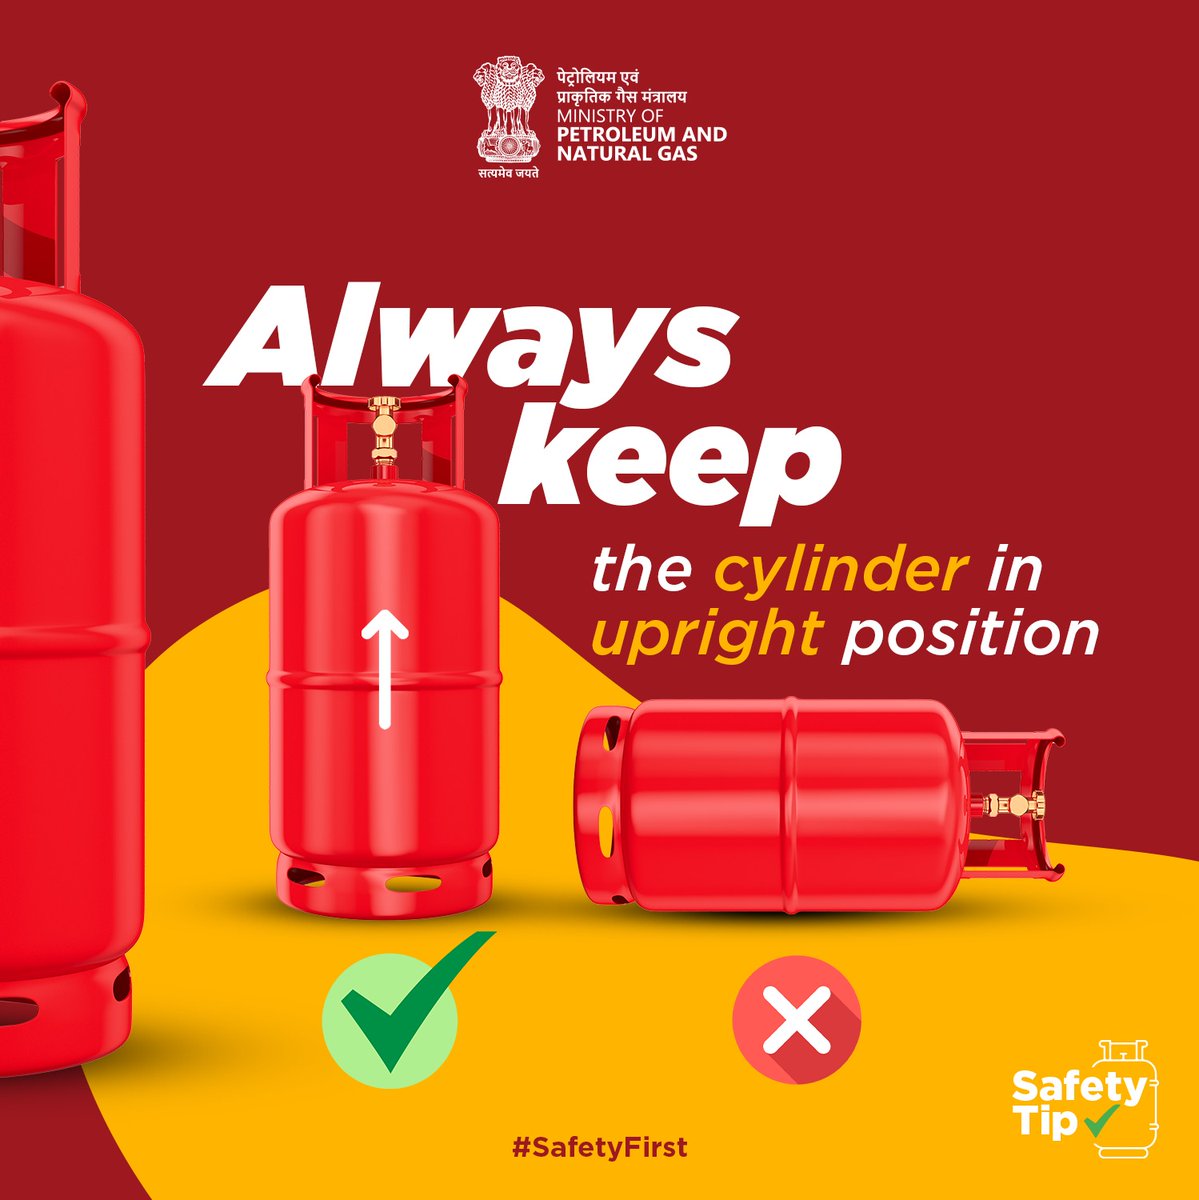 Safety Tip of the Day! 
Keep your LPG cylinder upright at all times, both when in use and during storage. A simple step that can prevent major accidents.
#SafetyTip #SafetyFirst #LPGCylinder